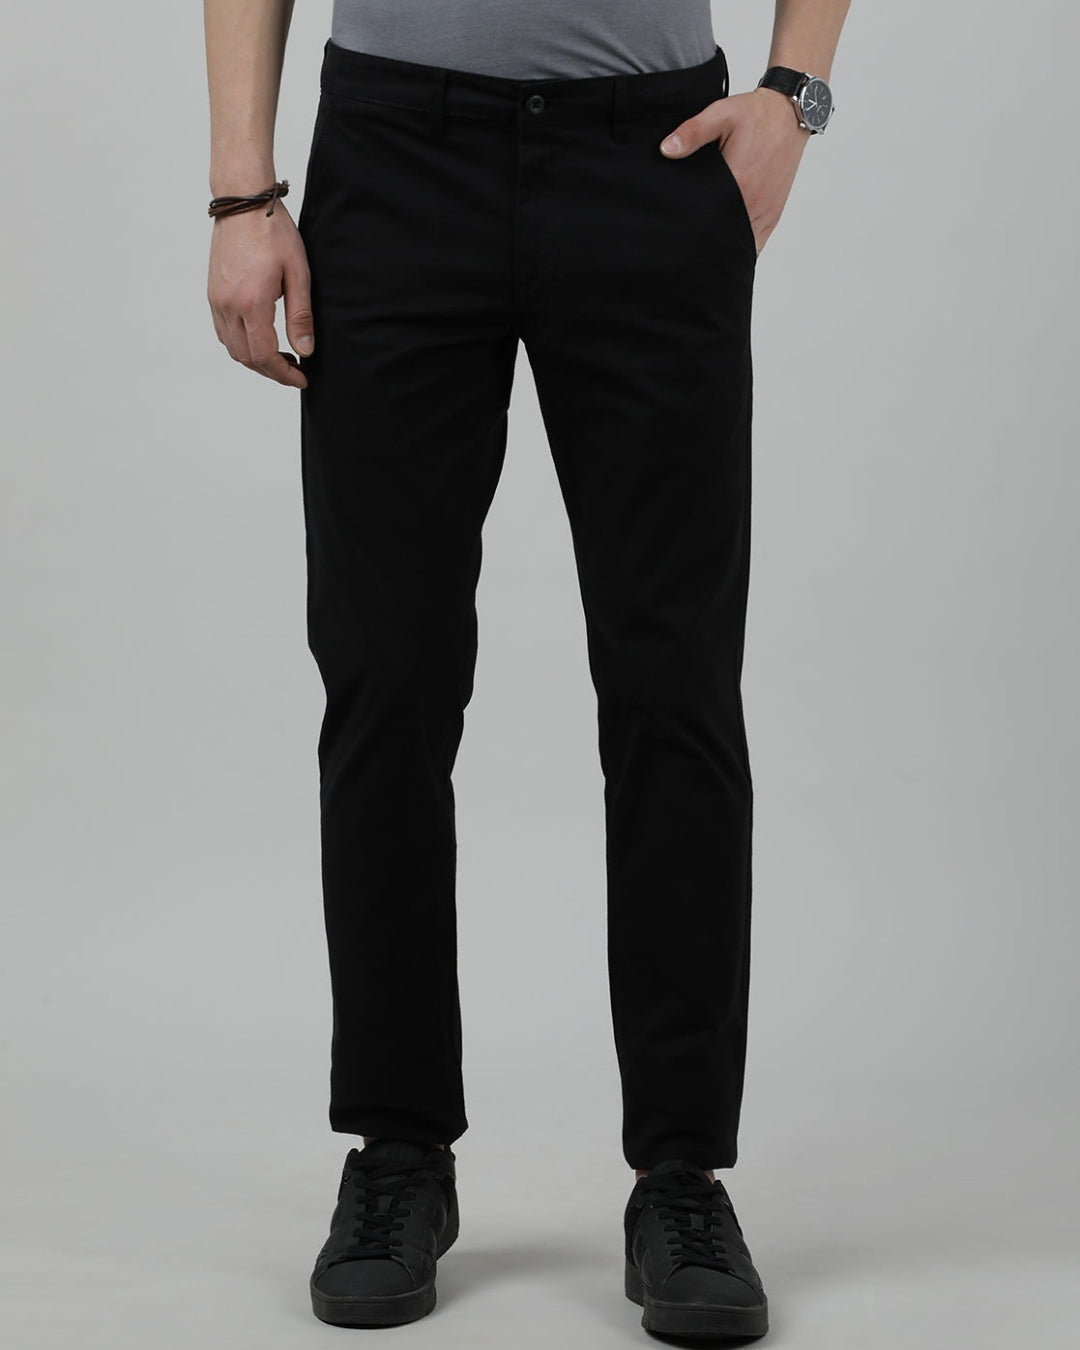 Casual Slim Fit Solid Black Trousers for Men